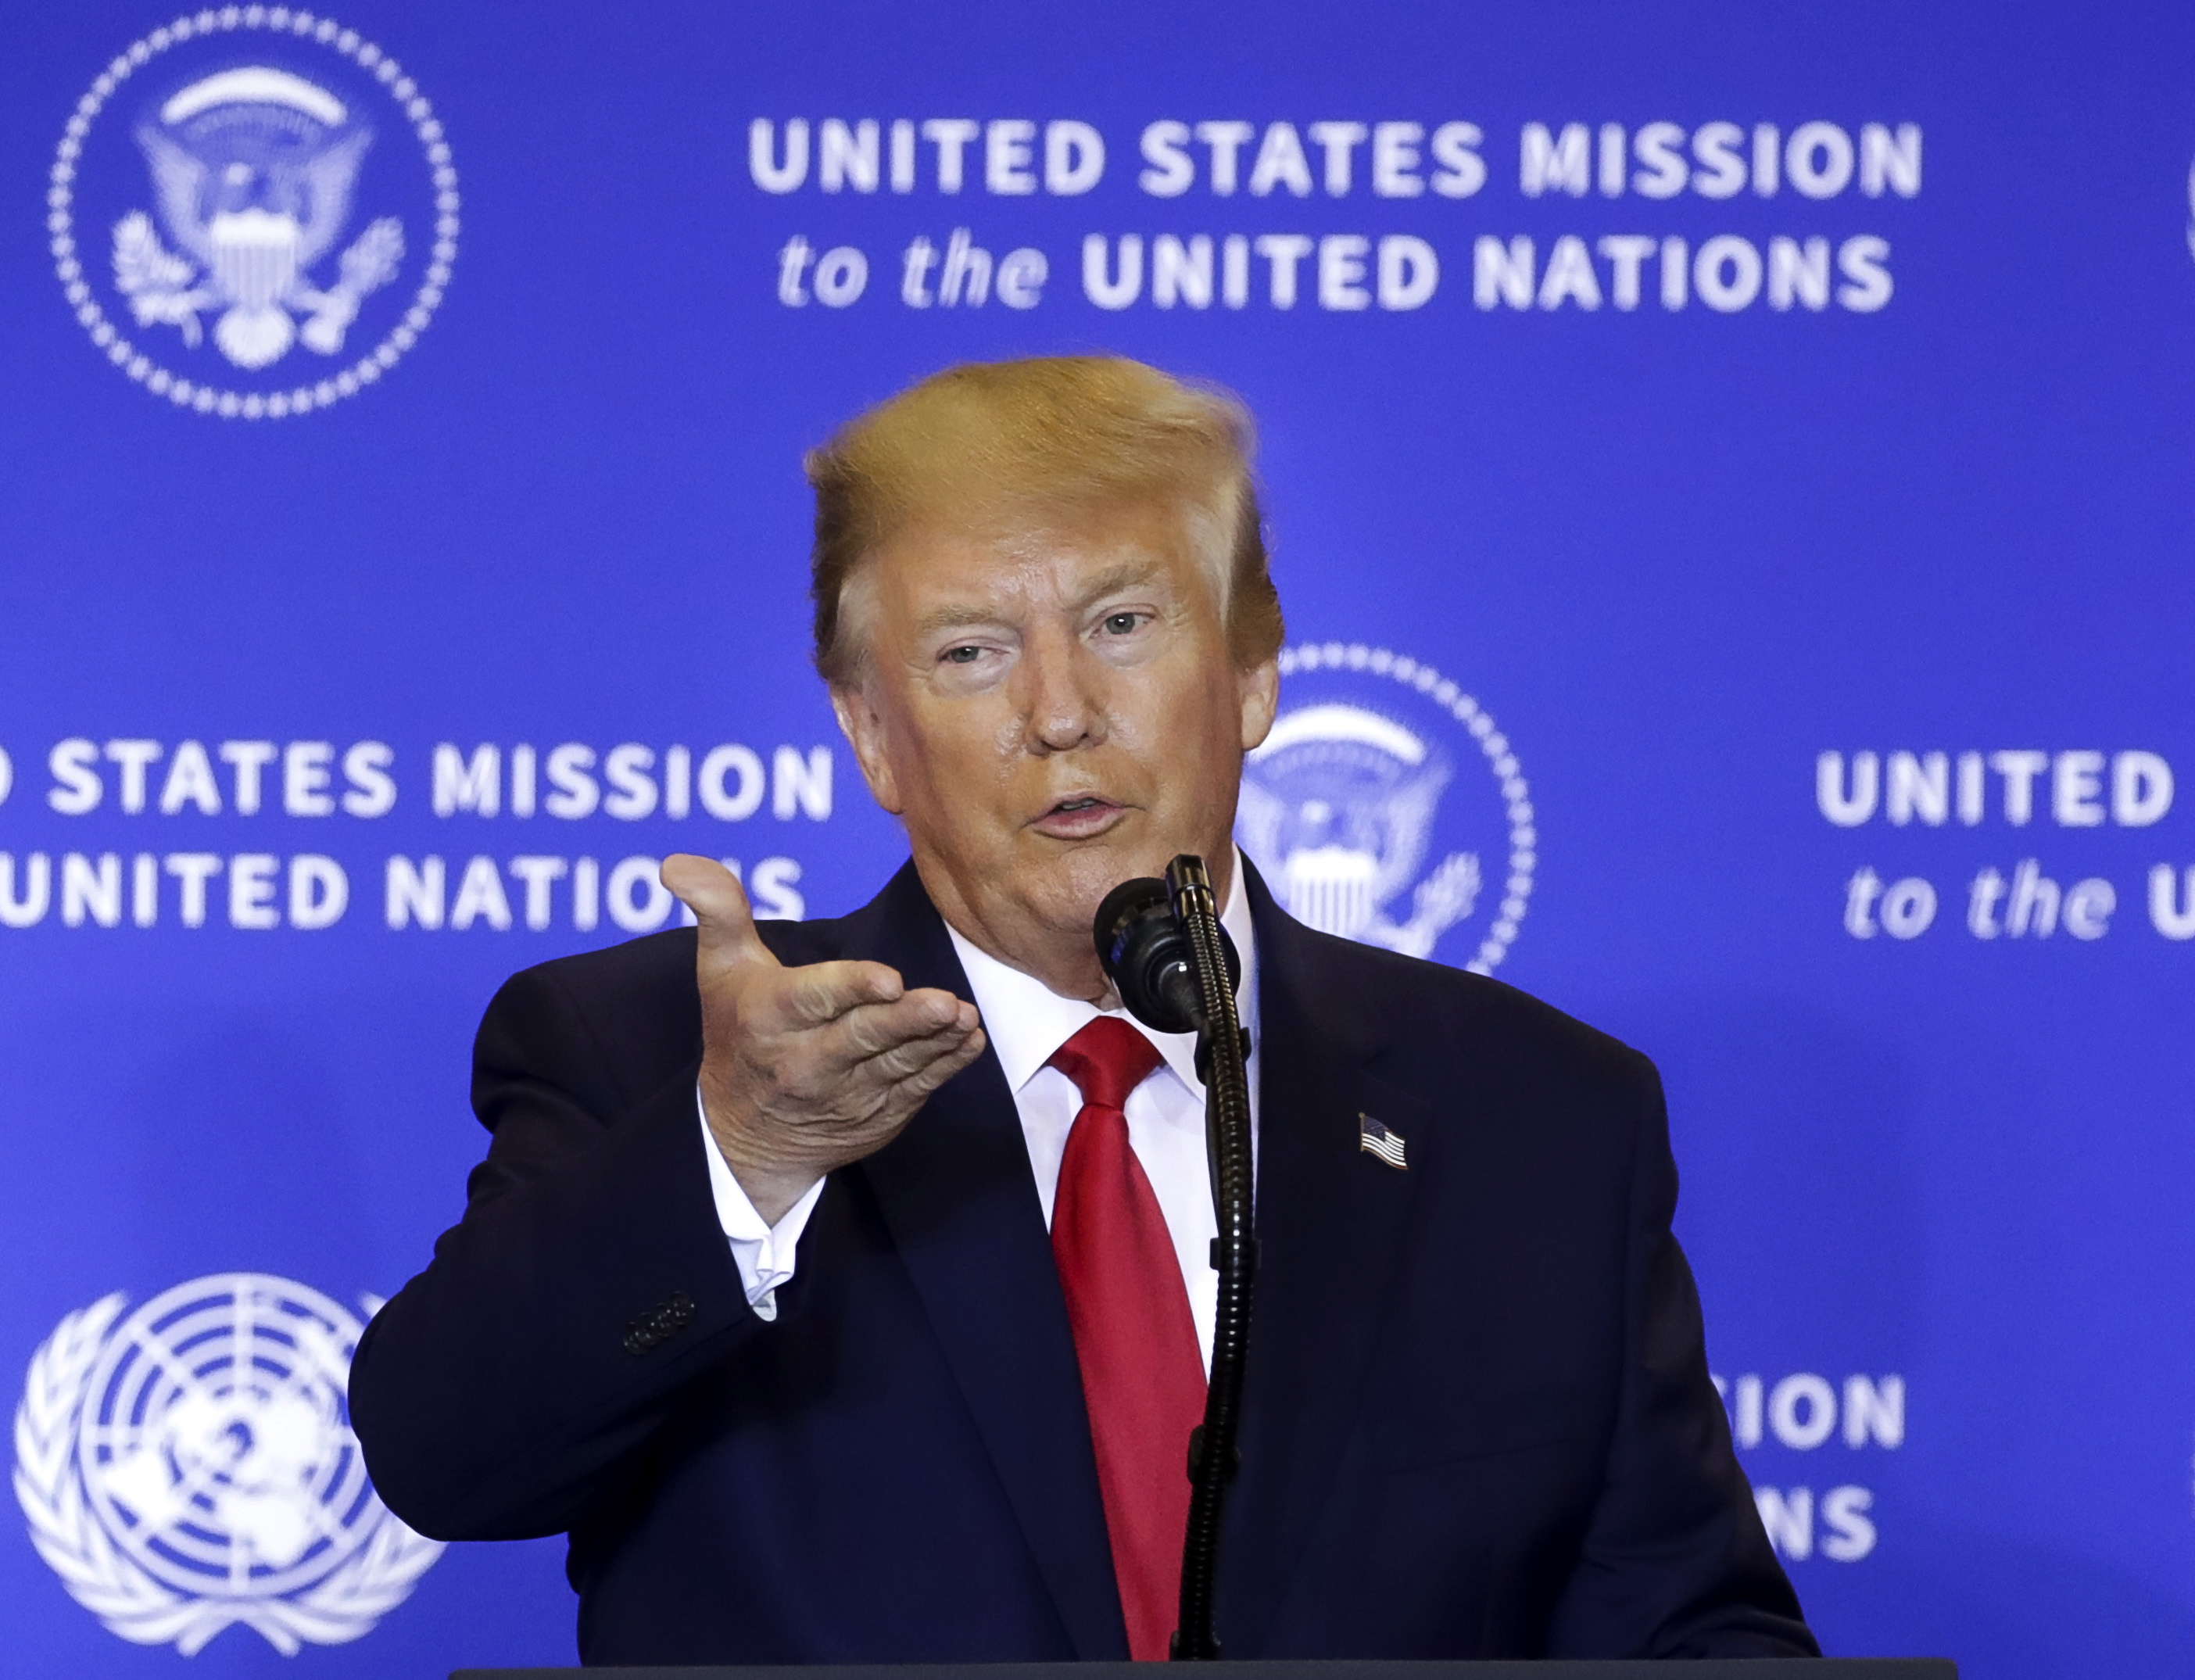 epa07869584 US President Donald J. Trump speaks during a press conference being held on the sidelines of the opening of the 74th session of the United Nations General Assembly in New York, New York, USA, 25 September 2019. Democrats in the United States Congress announced they are beginning a formal impeachment inquiry as a result of a President Trump's actions on a phone call with the president of Ukraine.  EPA/JASON SZENES